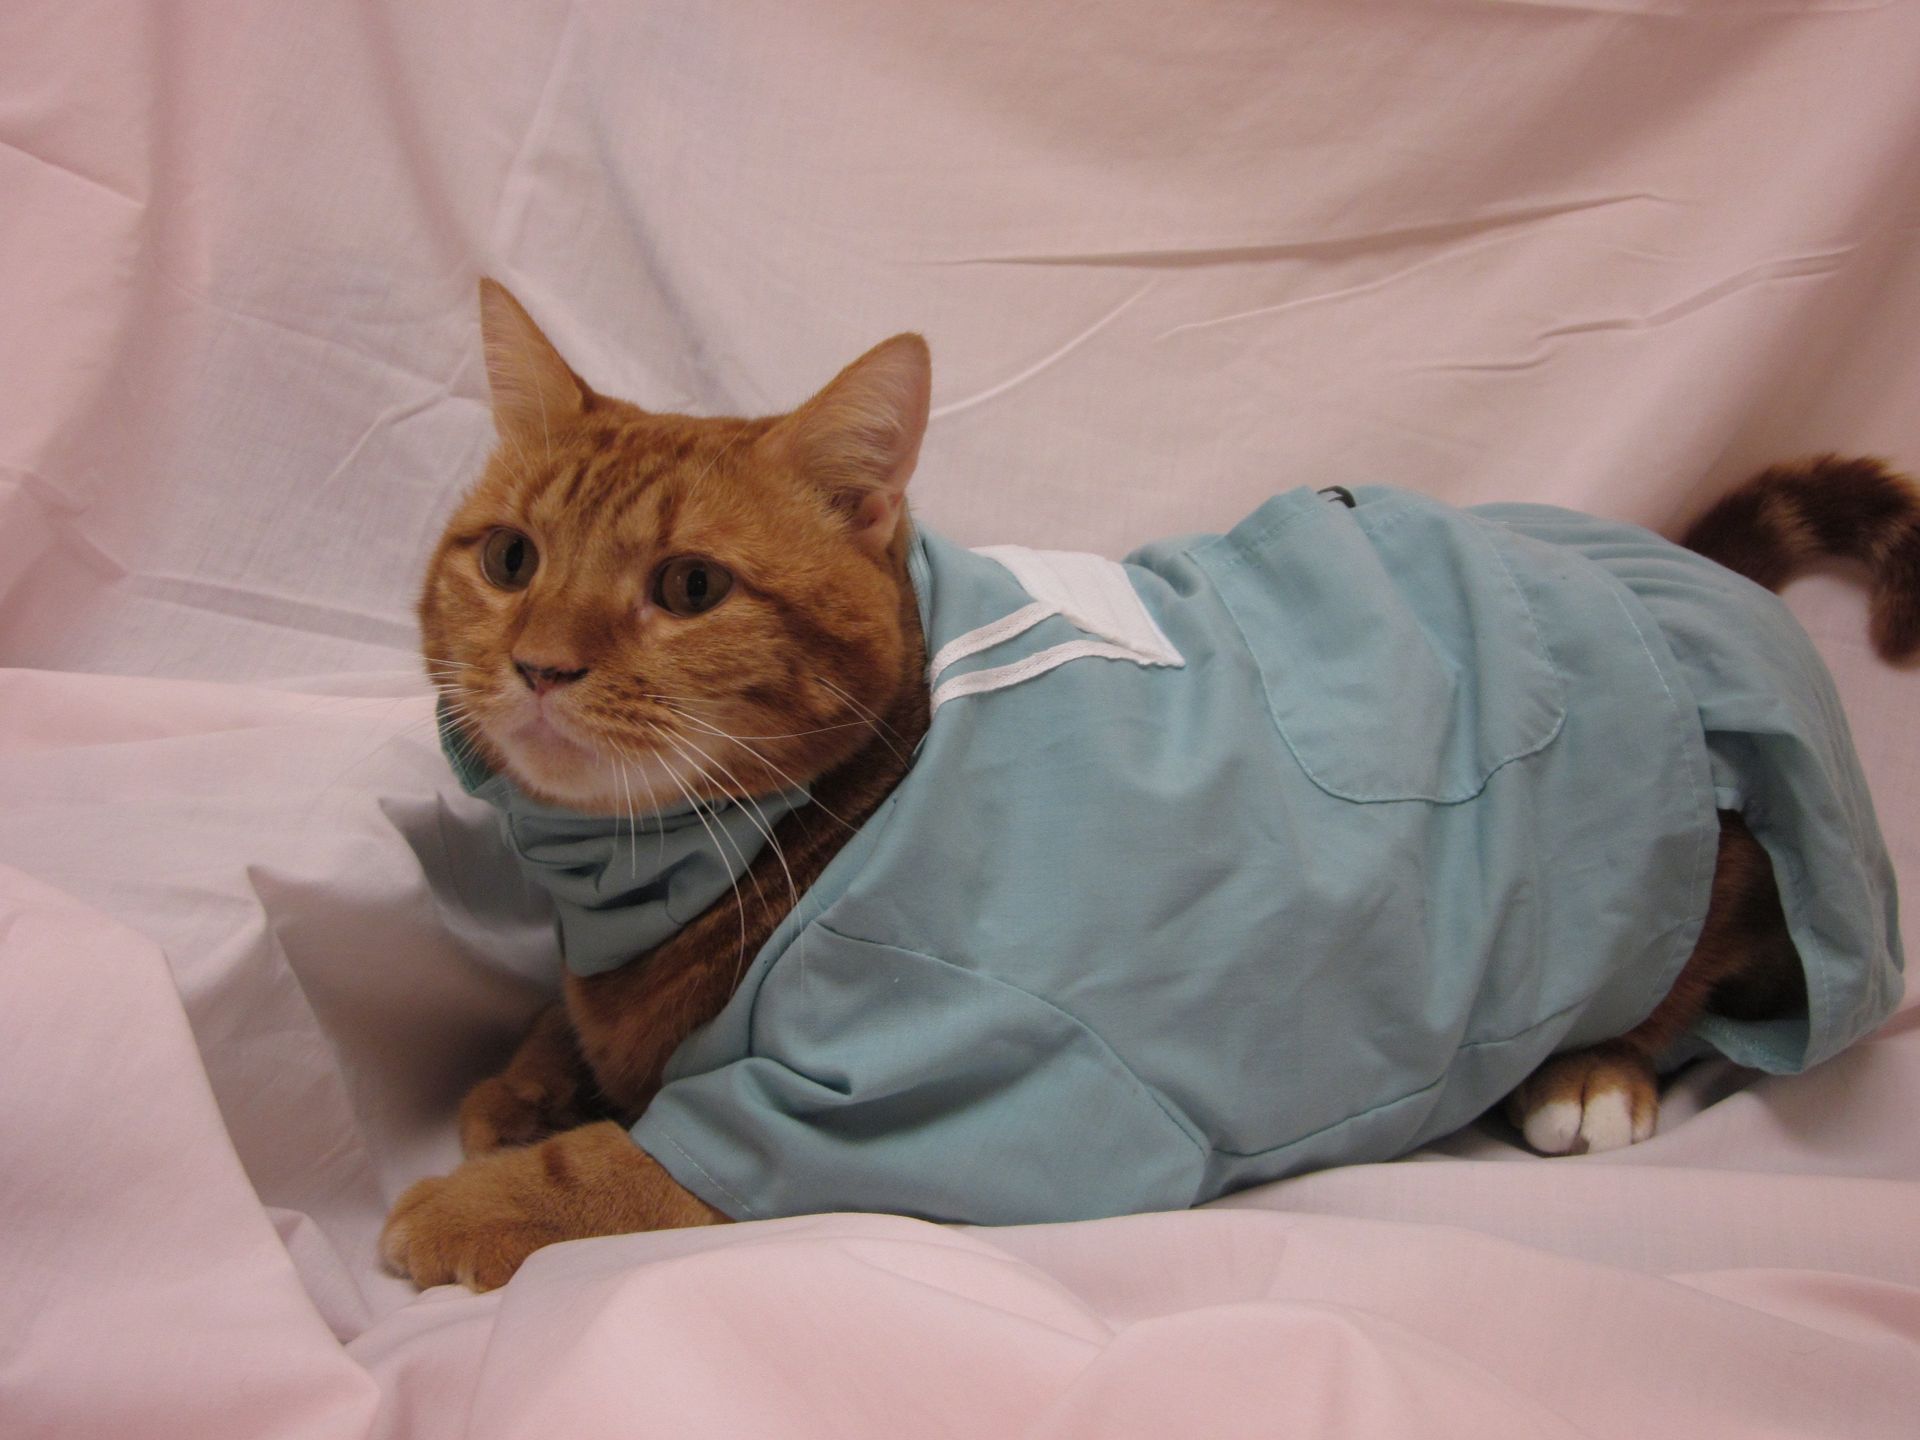 Cat in surgery gown